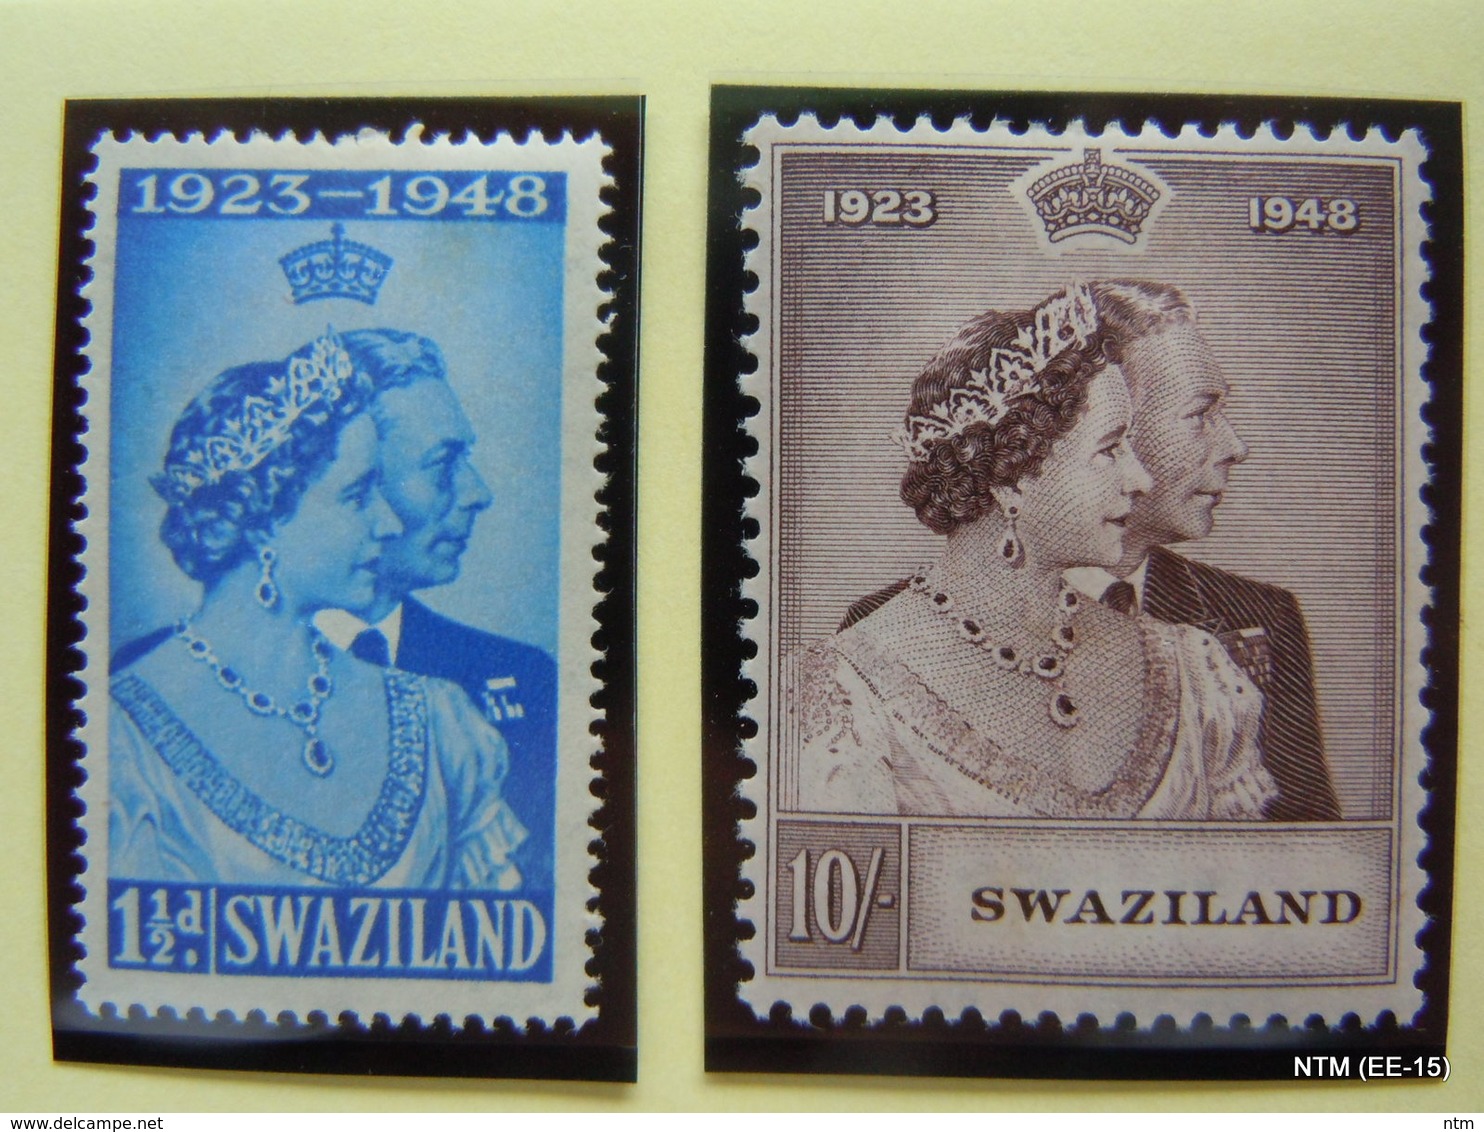 SWAZILAND 1948 King George VI And Queen Elizabeth: Royal Silver Wedding Anniversary Issue Pair (set Of 2 Stamps) MH - Swaziland (...-1967)